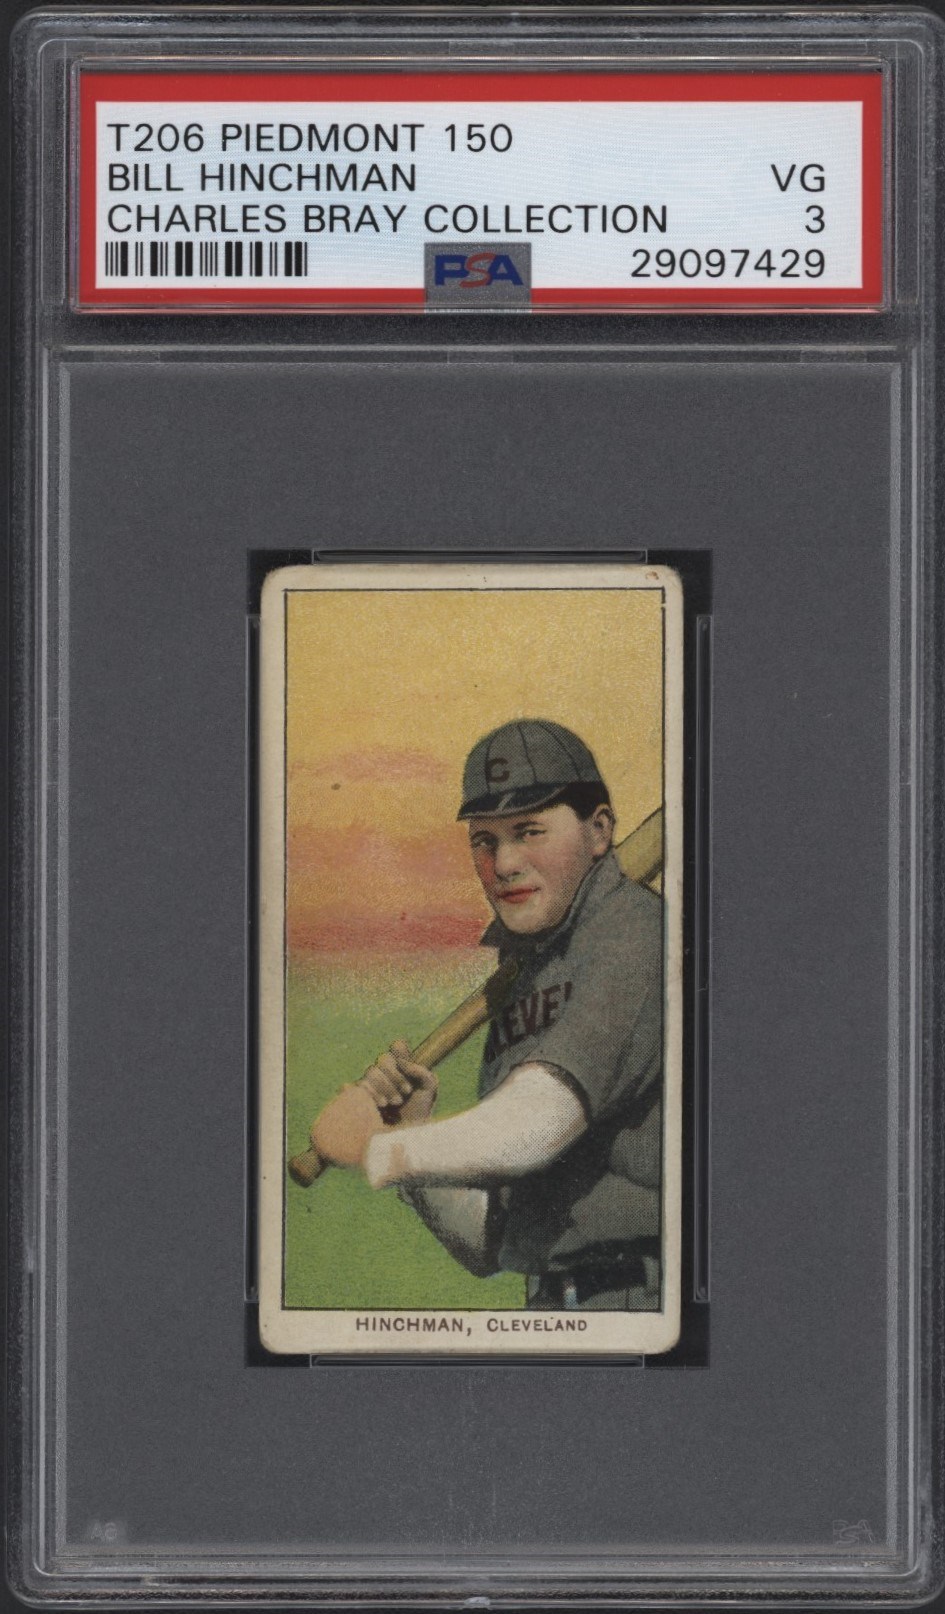 Baseball and Trading Cards - T206 Piedmont 150 Bill Hinchman PSA 3 From the Charles Bray Collection